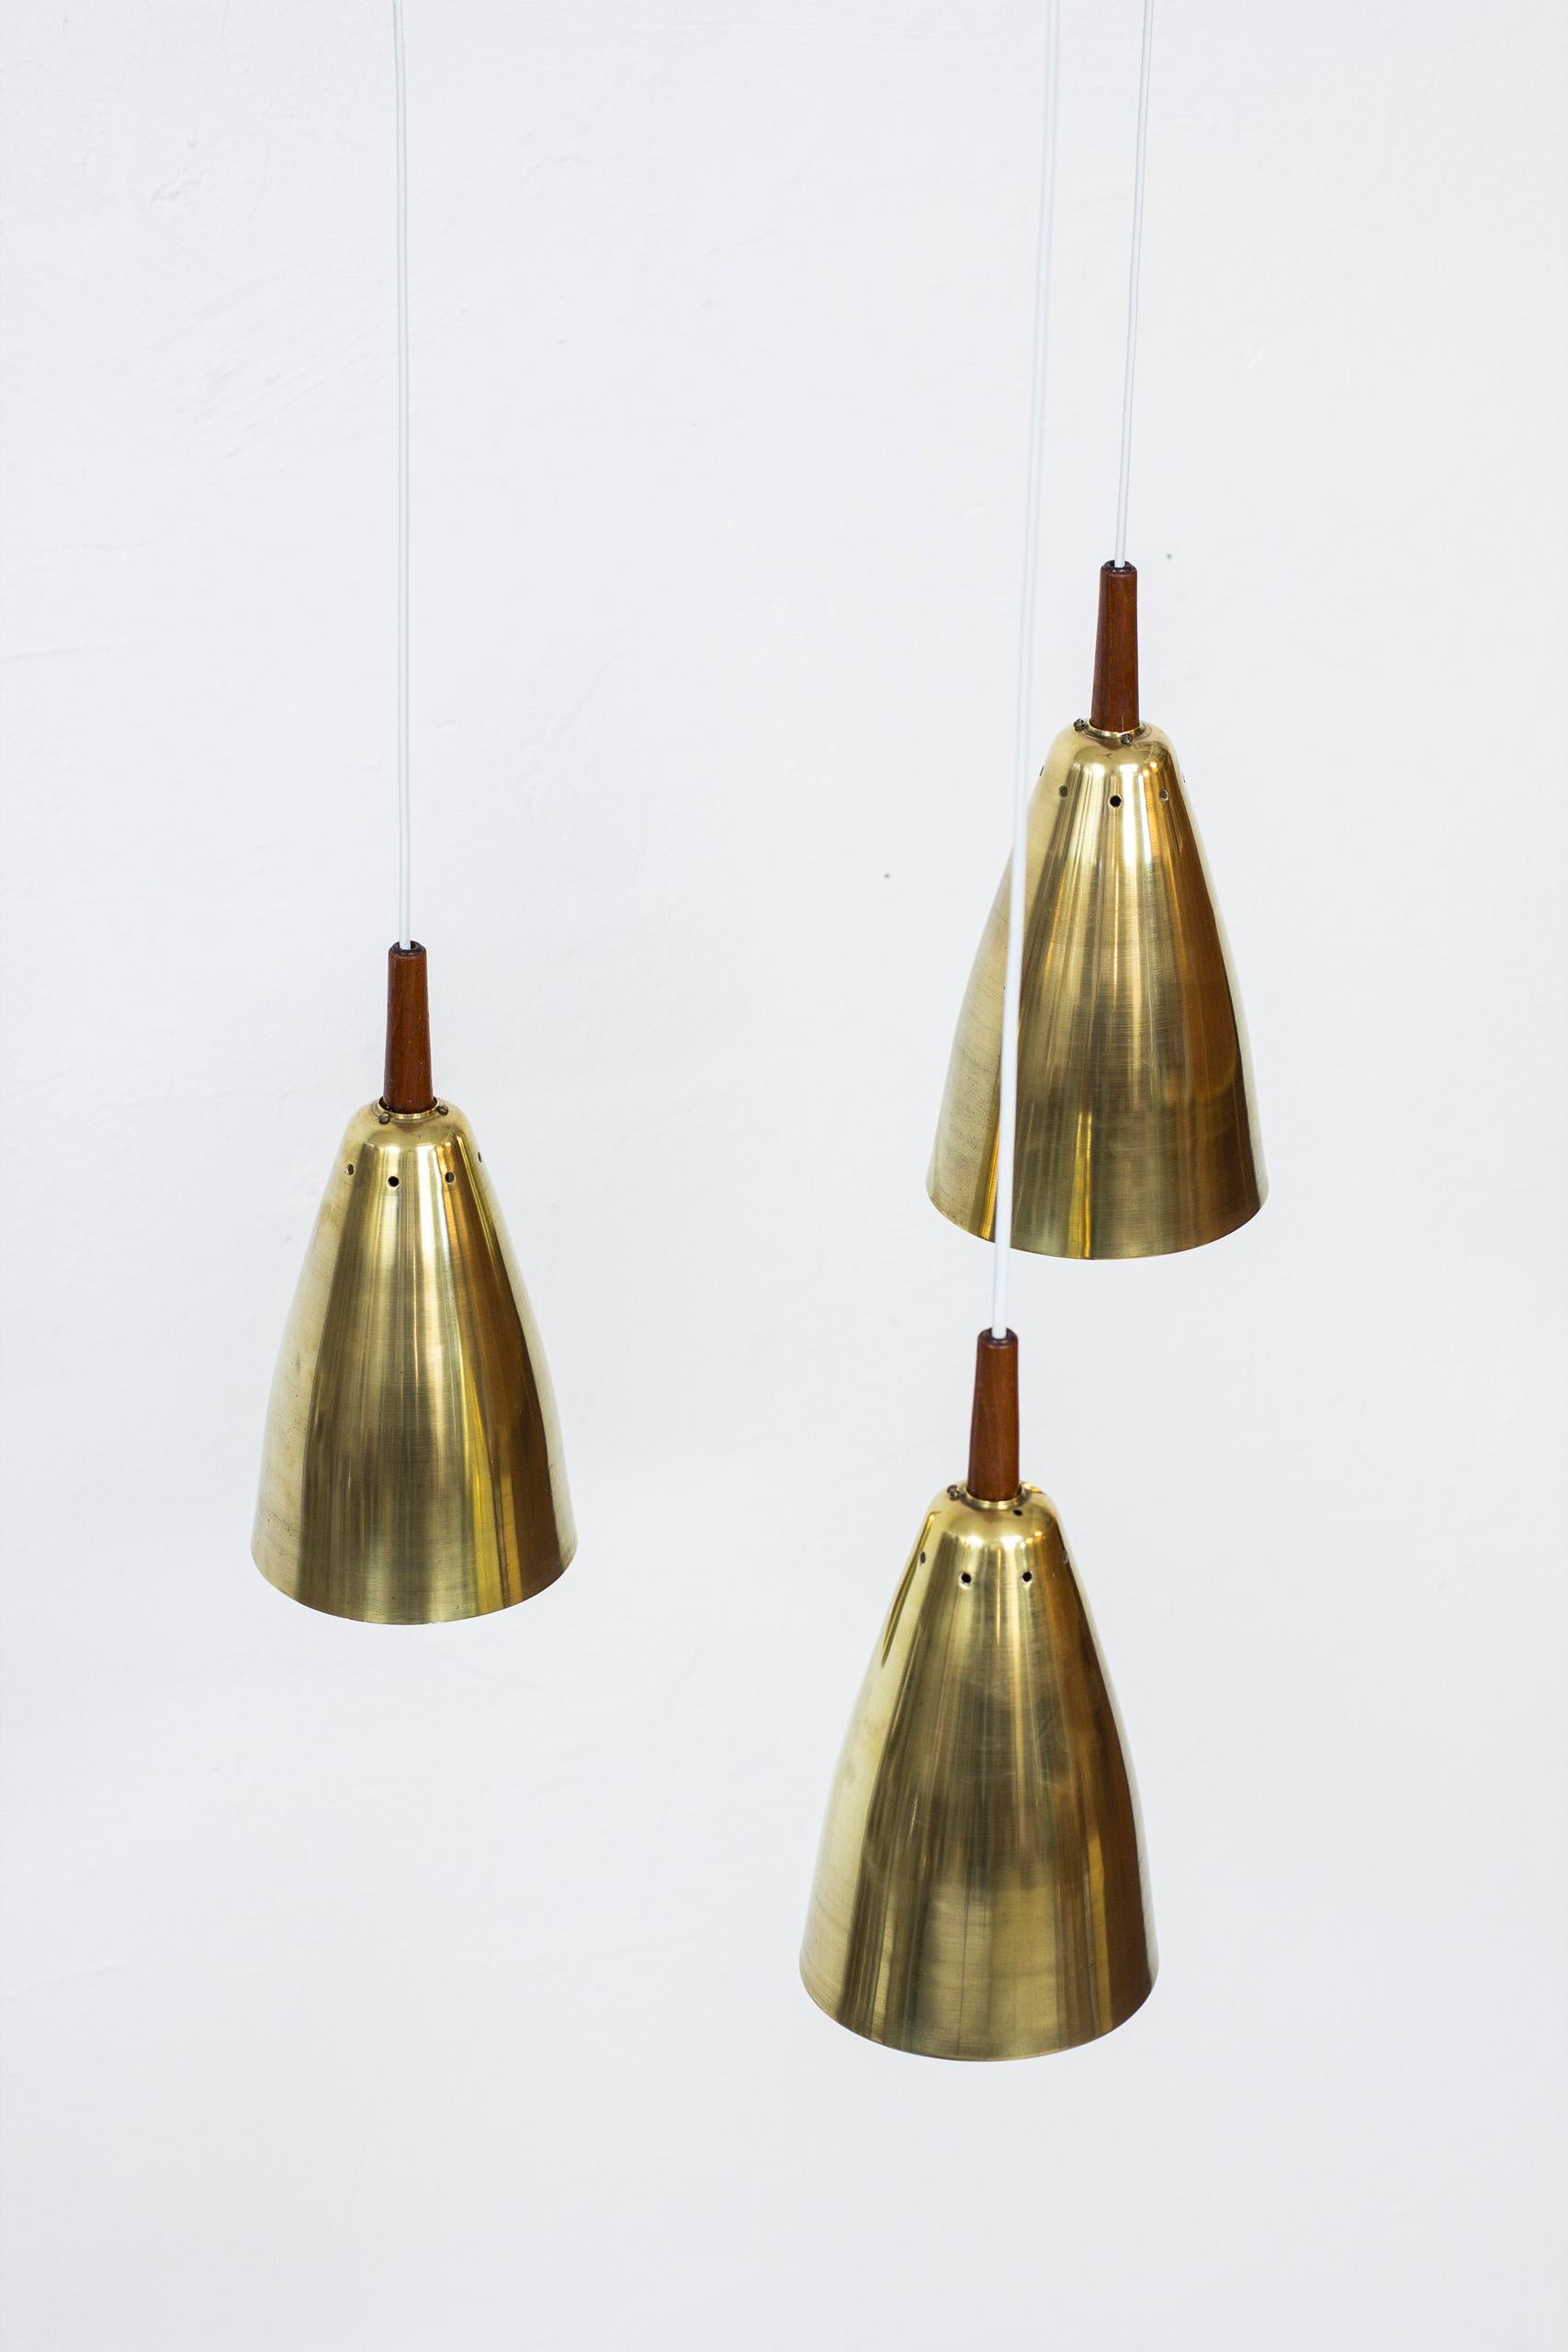 Tripple pendant lamp designed by Hans-Agne Jakobsson. Produced by his own company in Åhus during the 1950s. Three solid brass shades and ceiling mount with teak details and solid teak triangle that separate the shades. Signed with label. Very good